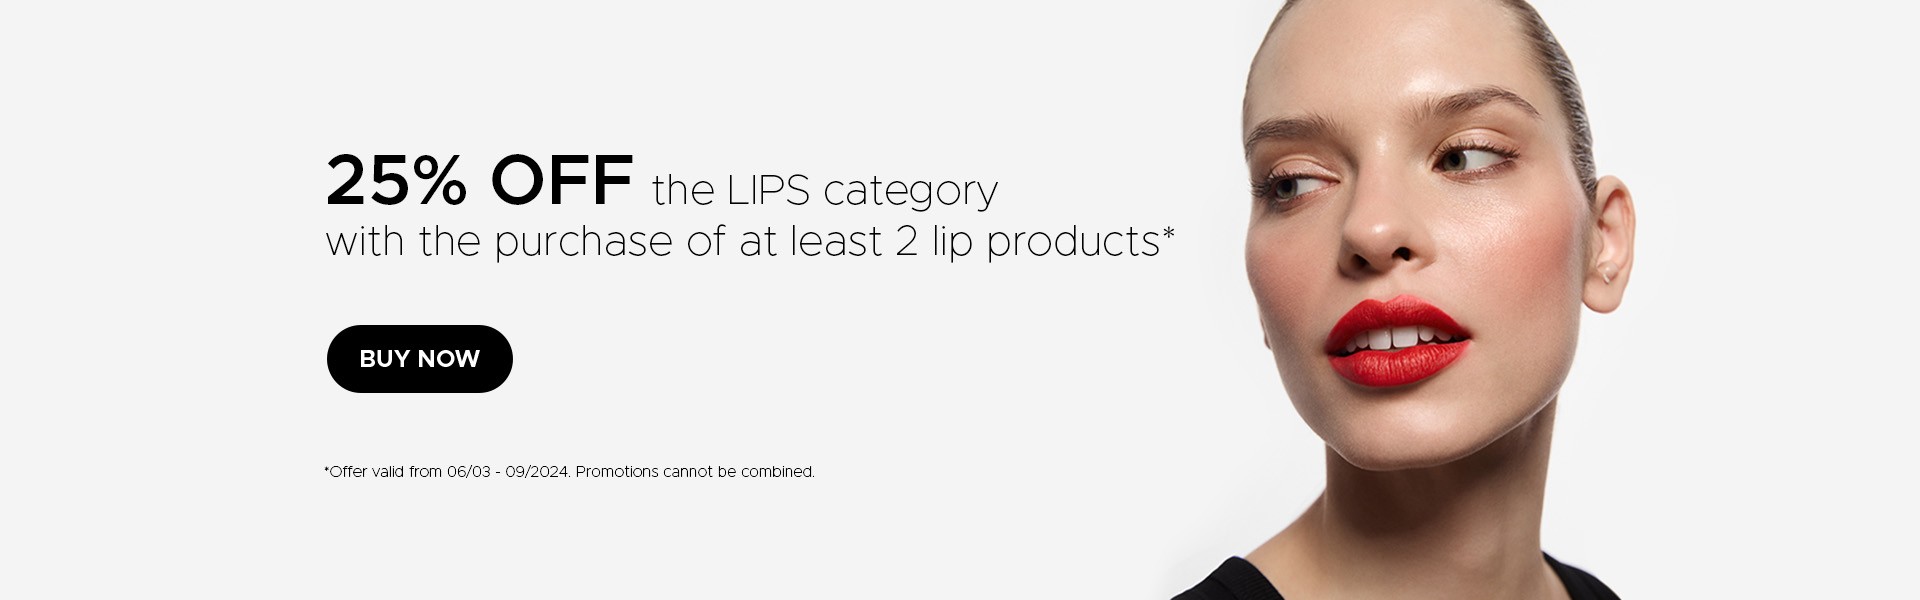 25% off the LIPS category